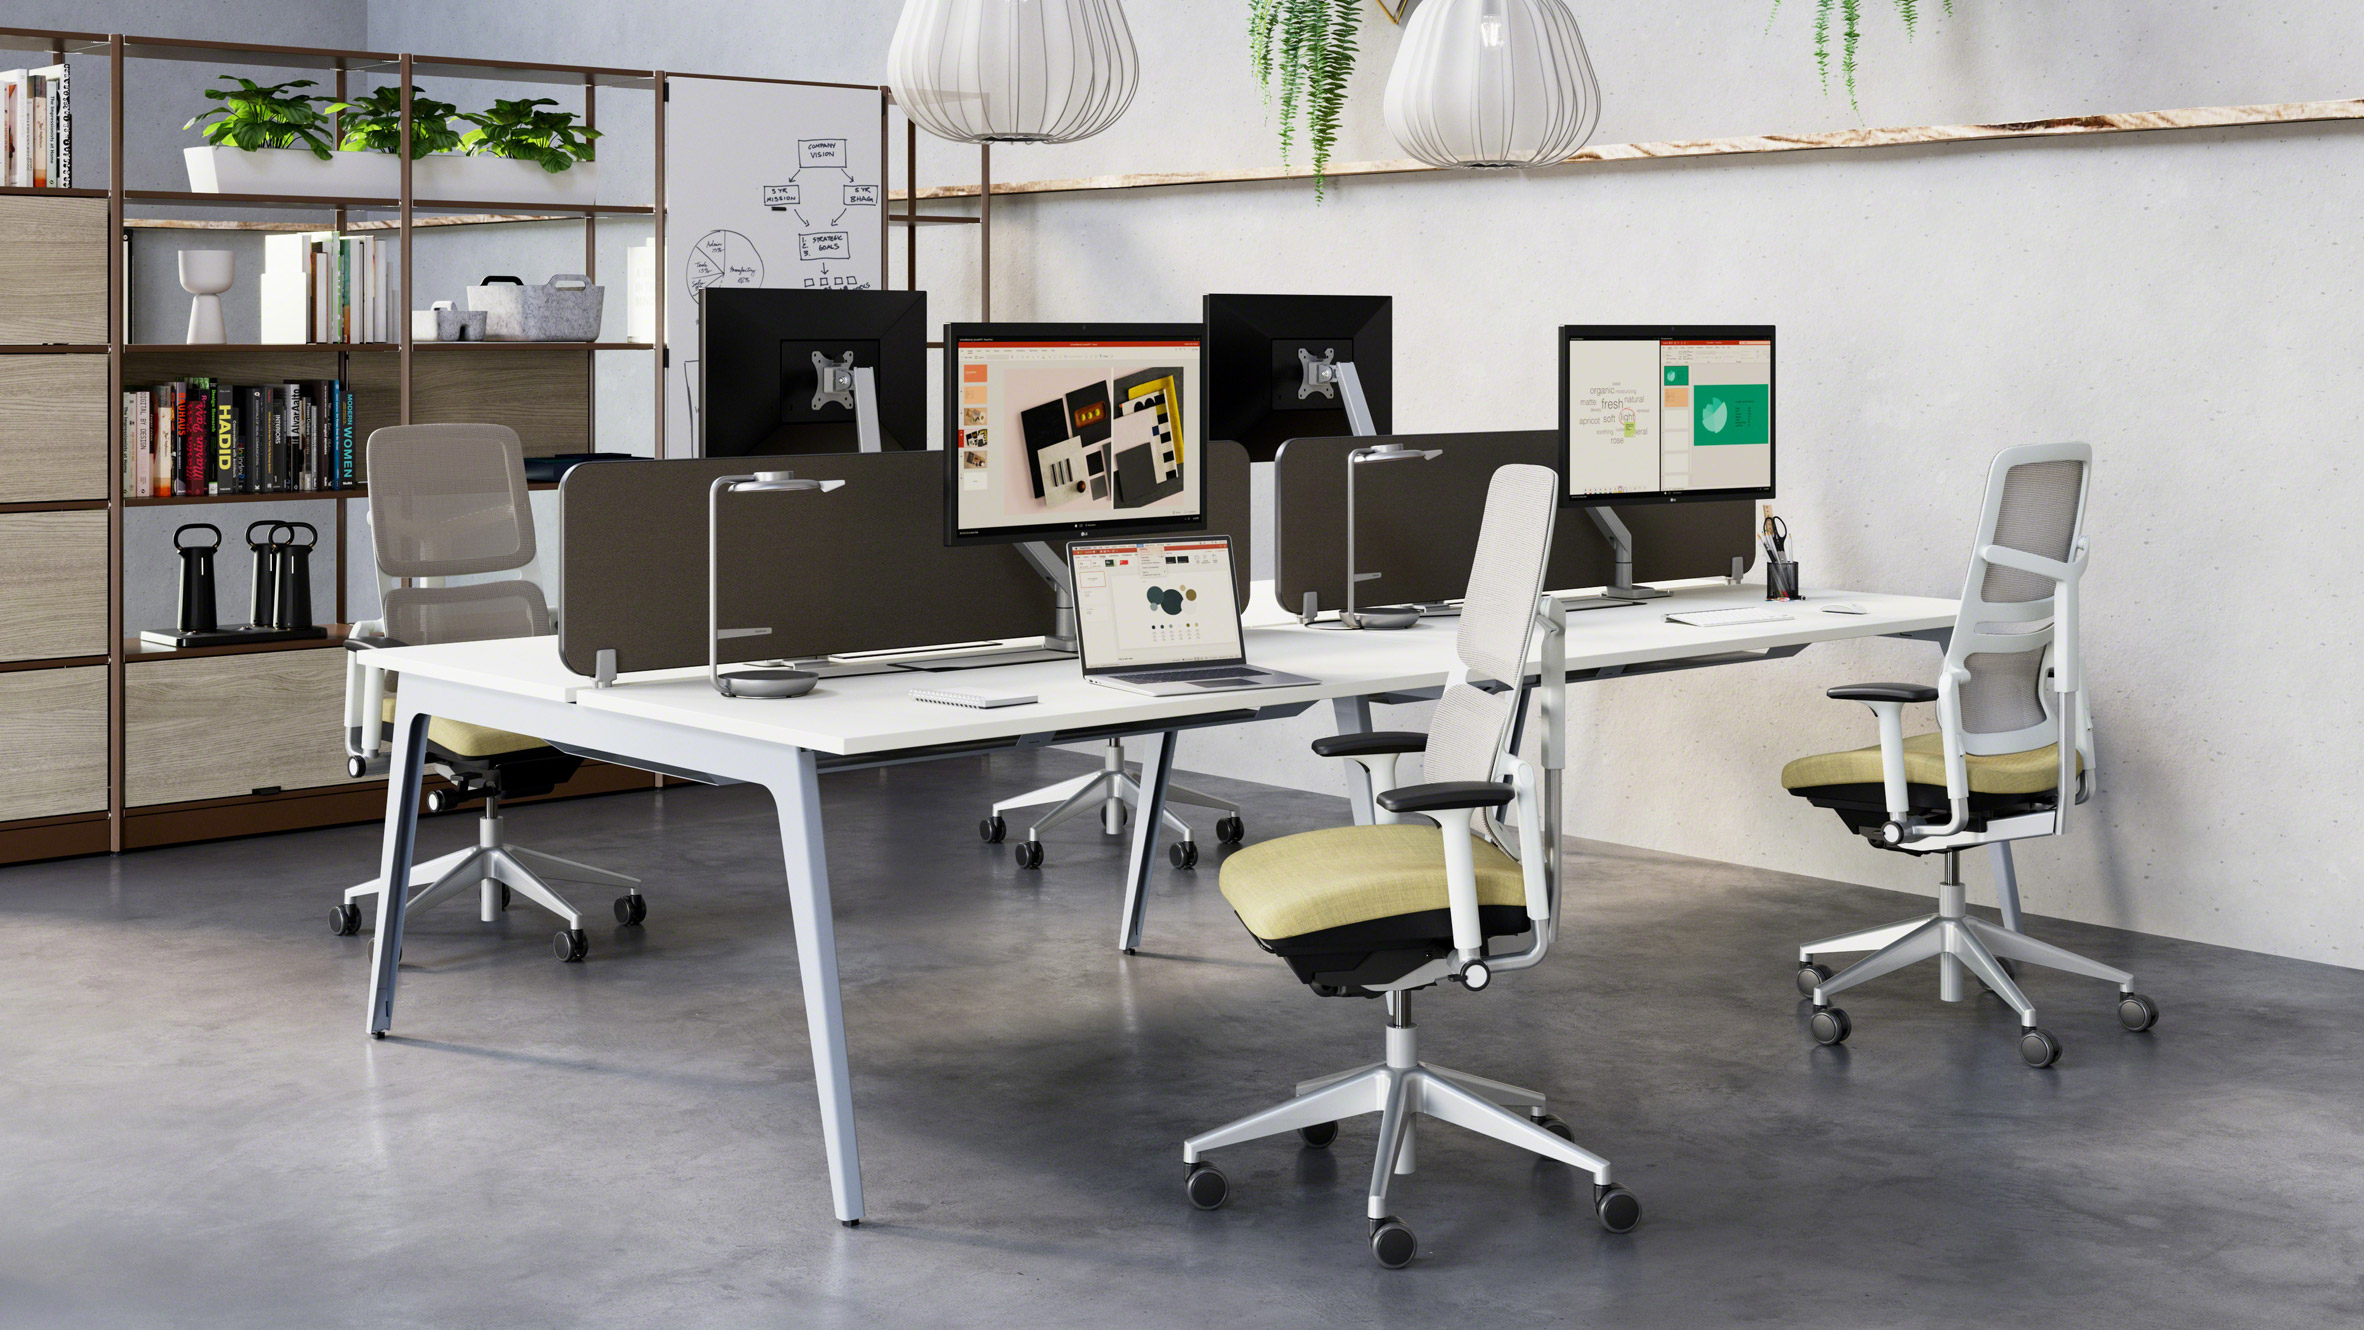 Please Air office chair by Steelcase